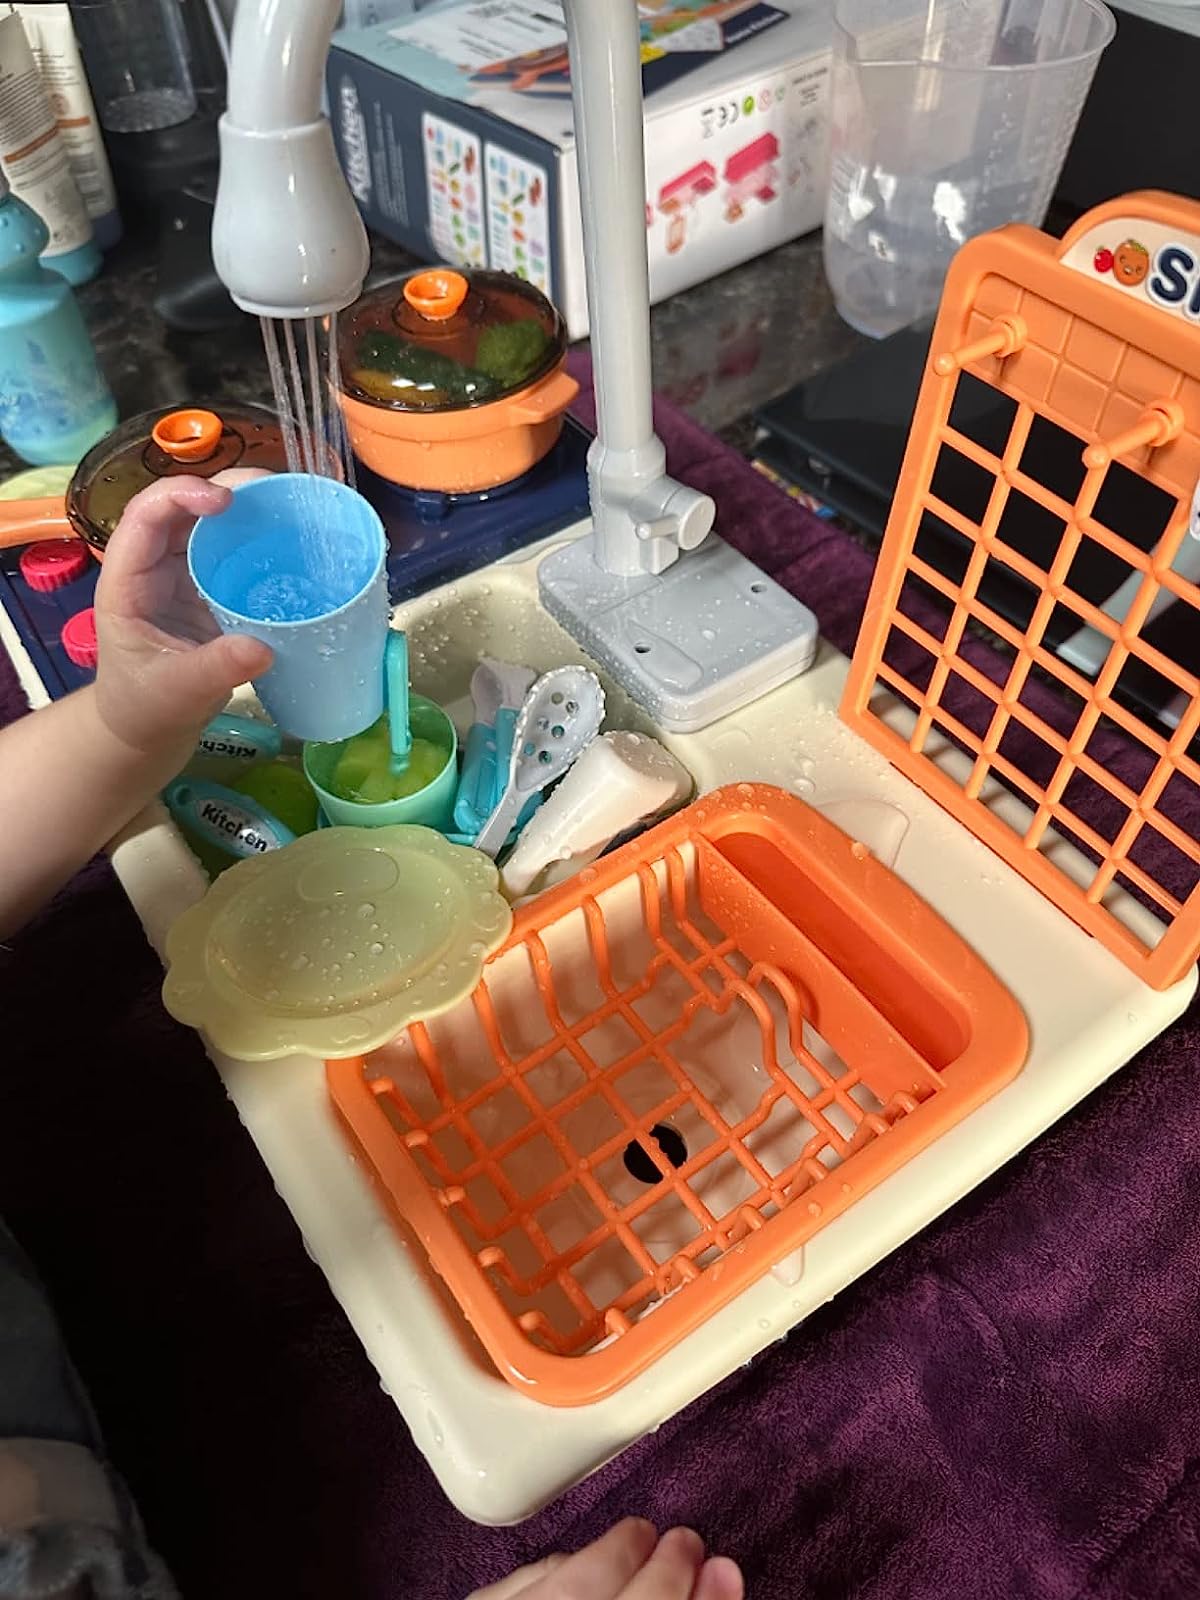 Children's Simulation Dishwasher Playing With Water Toys photo review